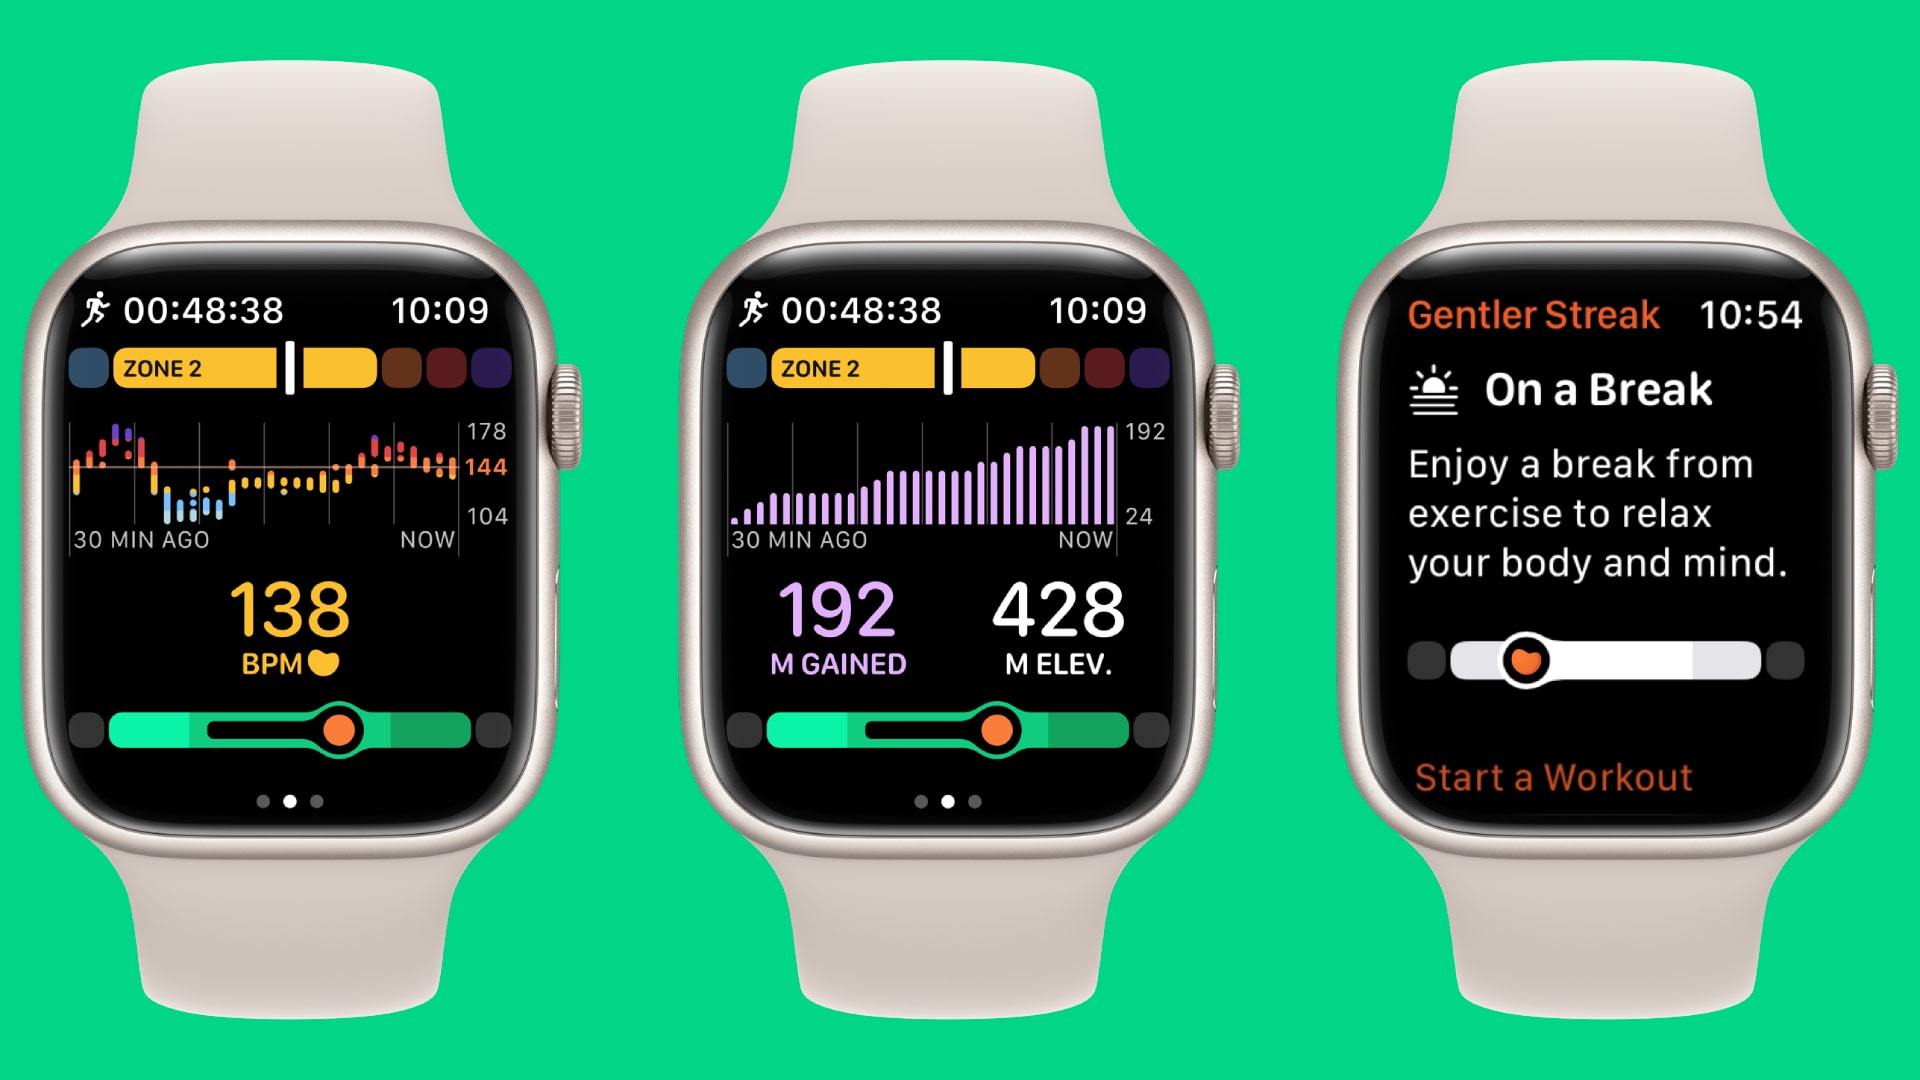 I have three Apple Watches lined up side by side, with the Gentler Streak app running on each one.